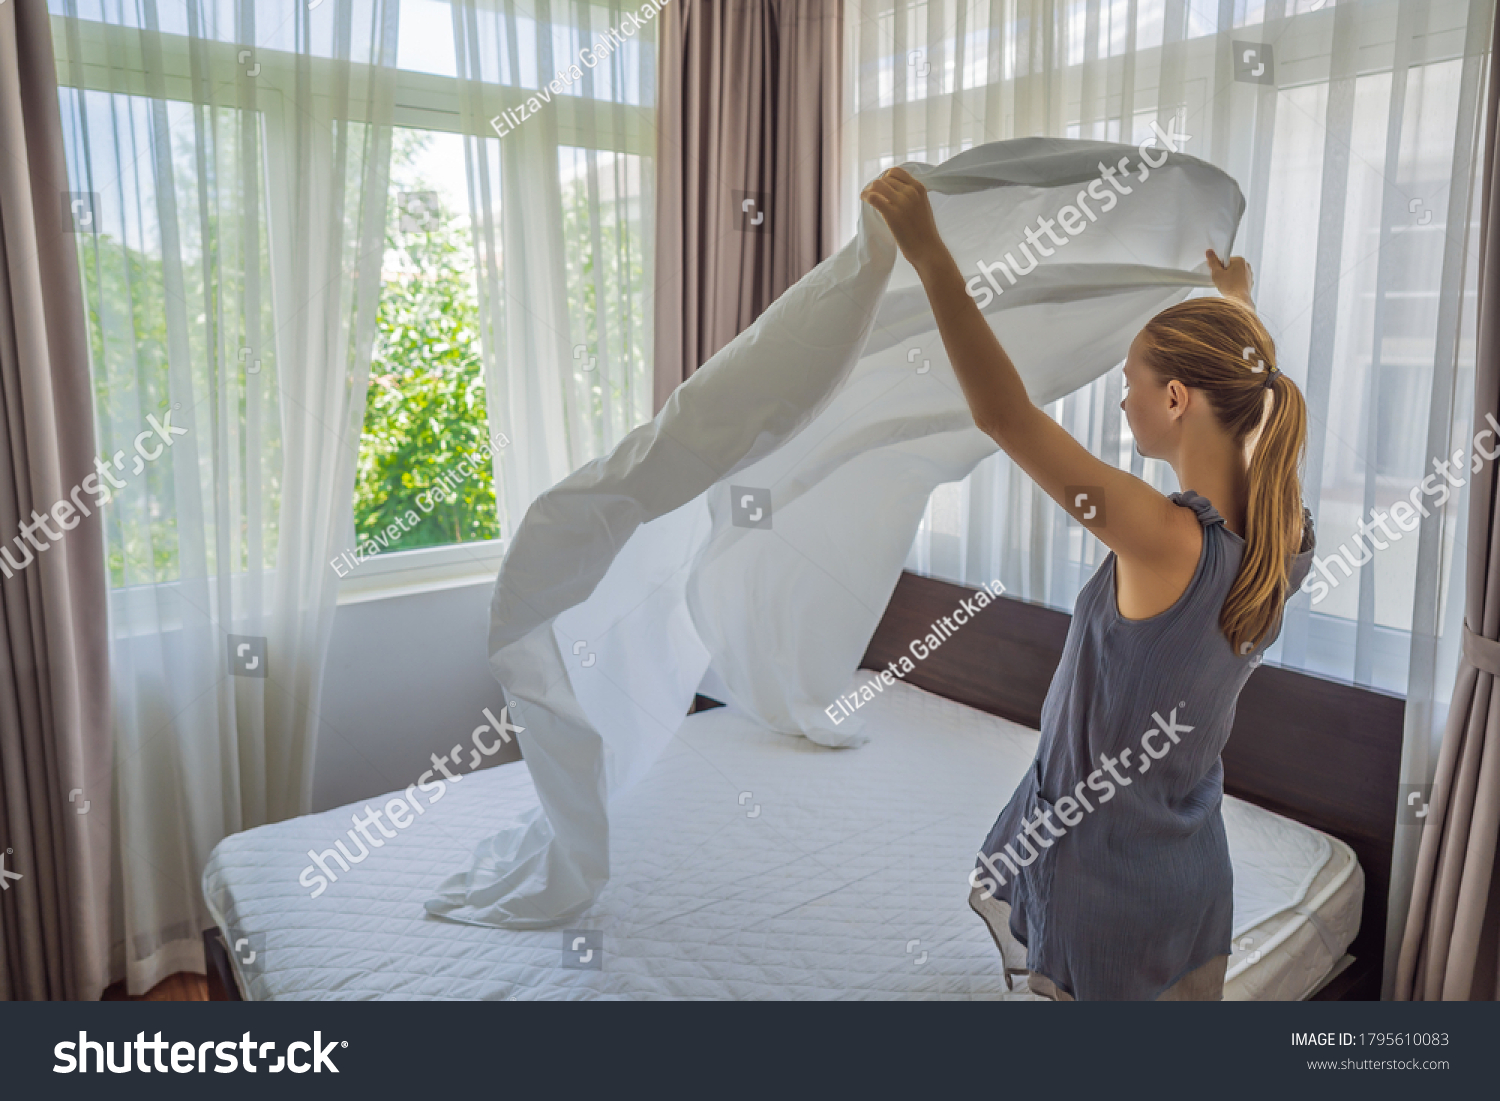 Young Female Housekeeper Changing Bedding In Hotel Room #1795610083